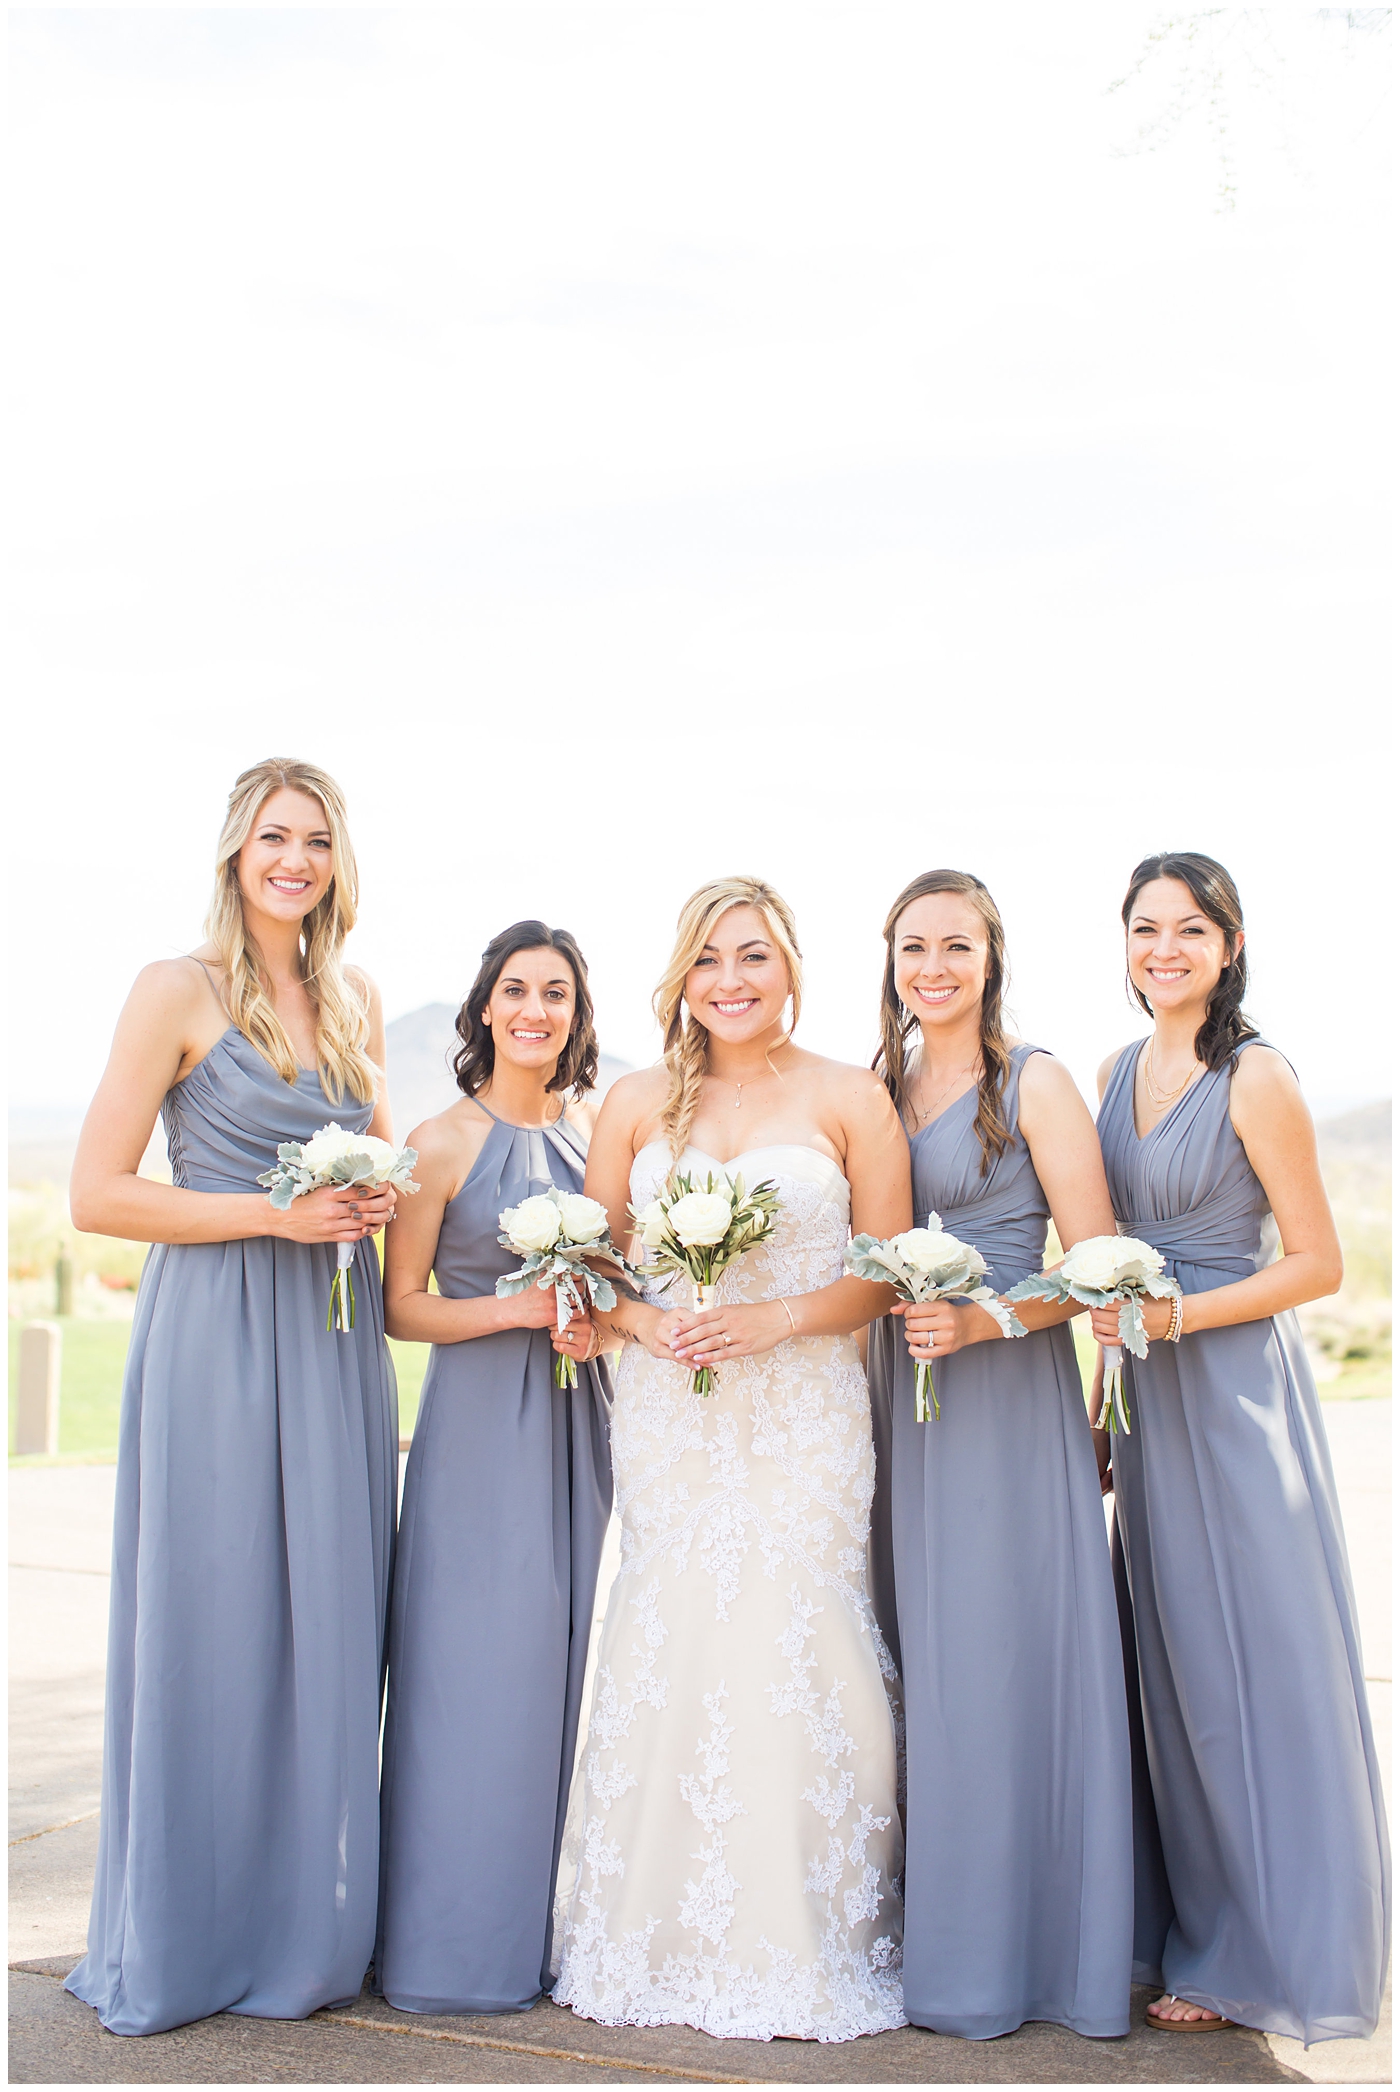 bride with fishtail braid and strapless dress with white rose and greenery bouquet with bridesmaids in slate gray long dresses on wedding day bridal party portrait